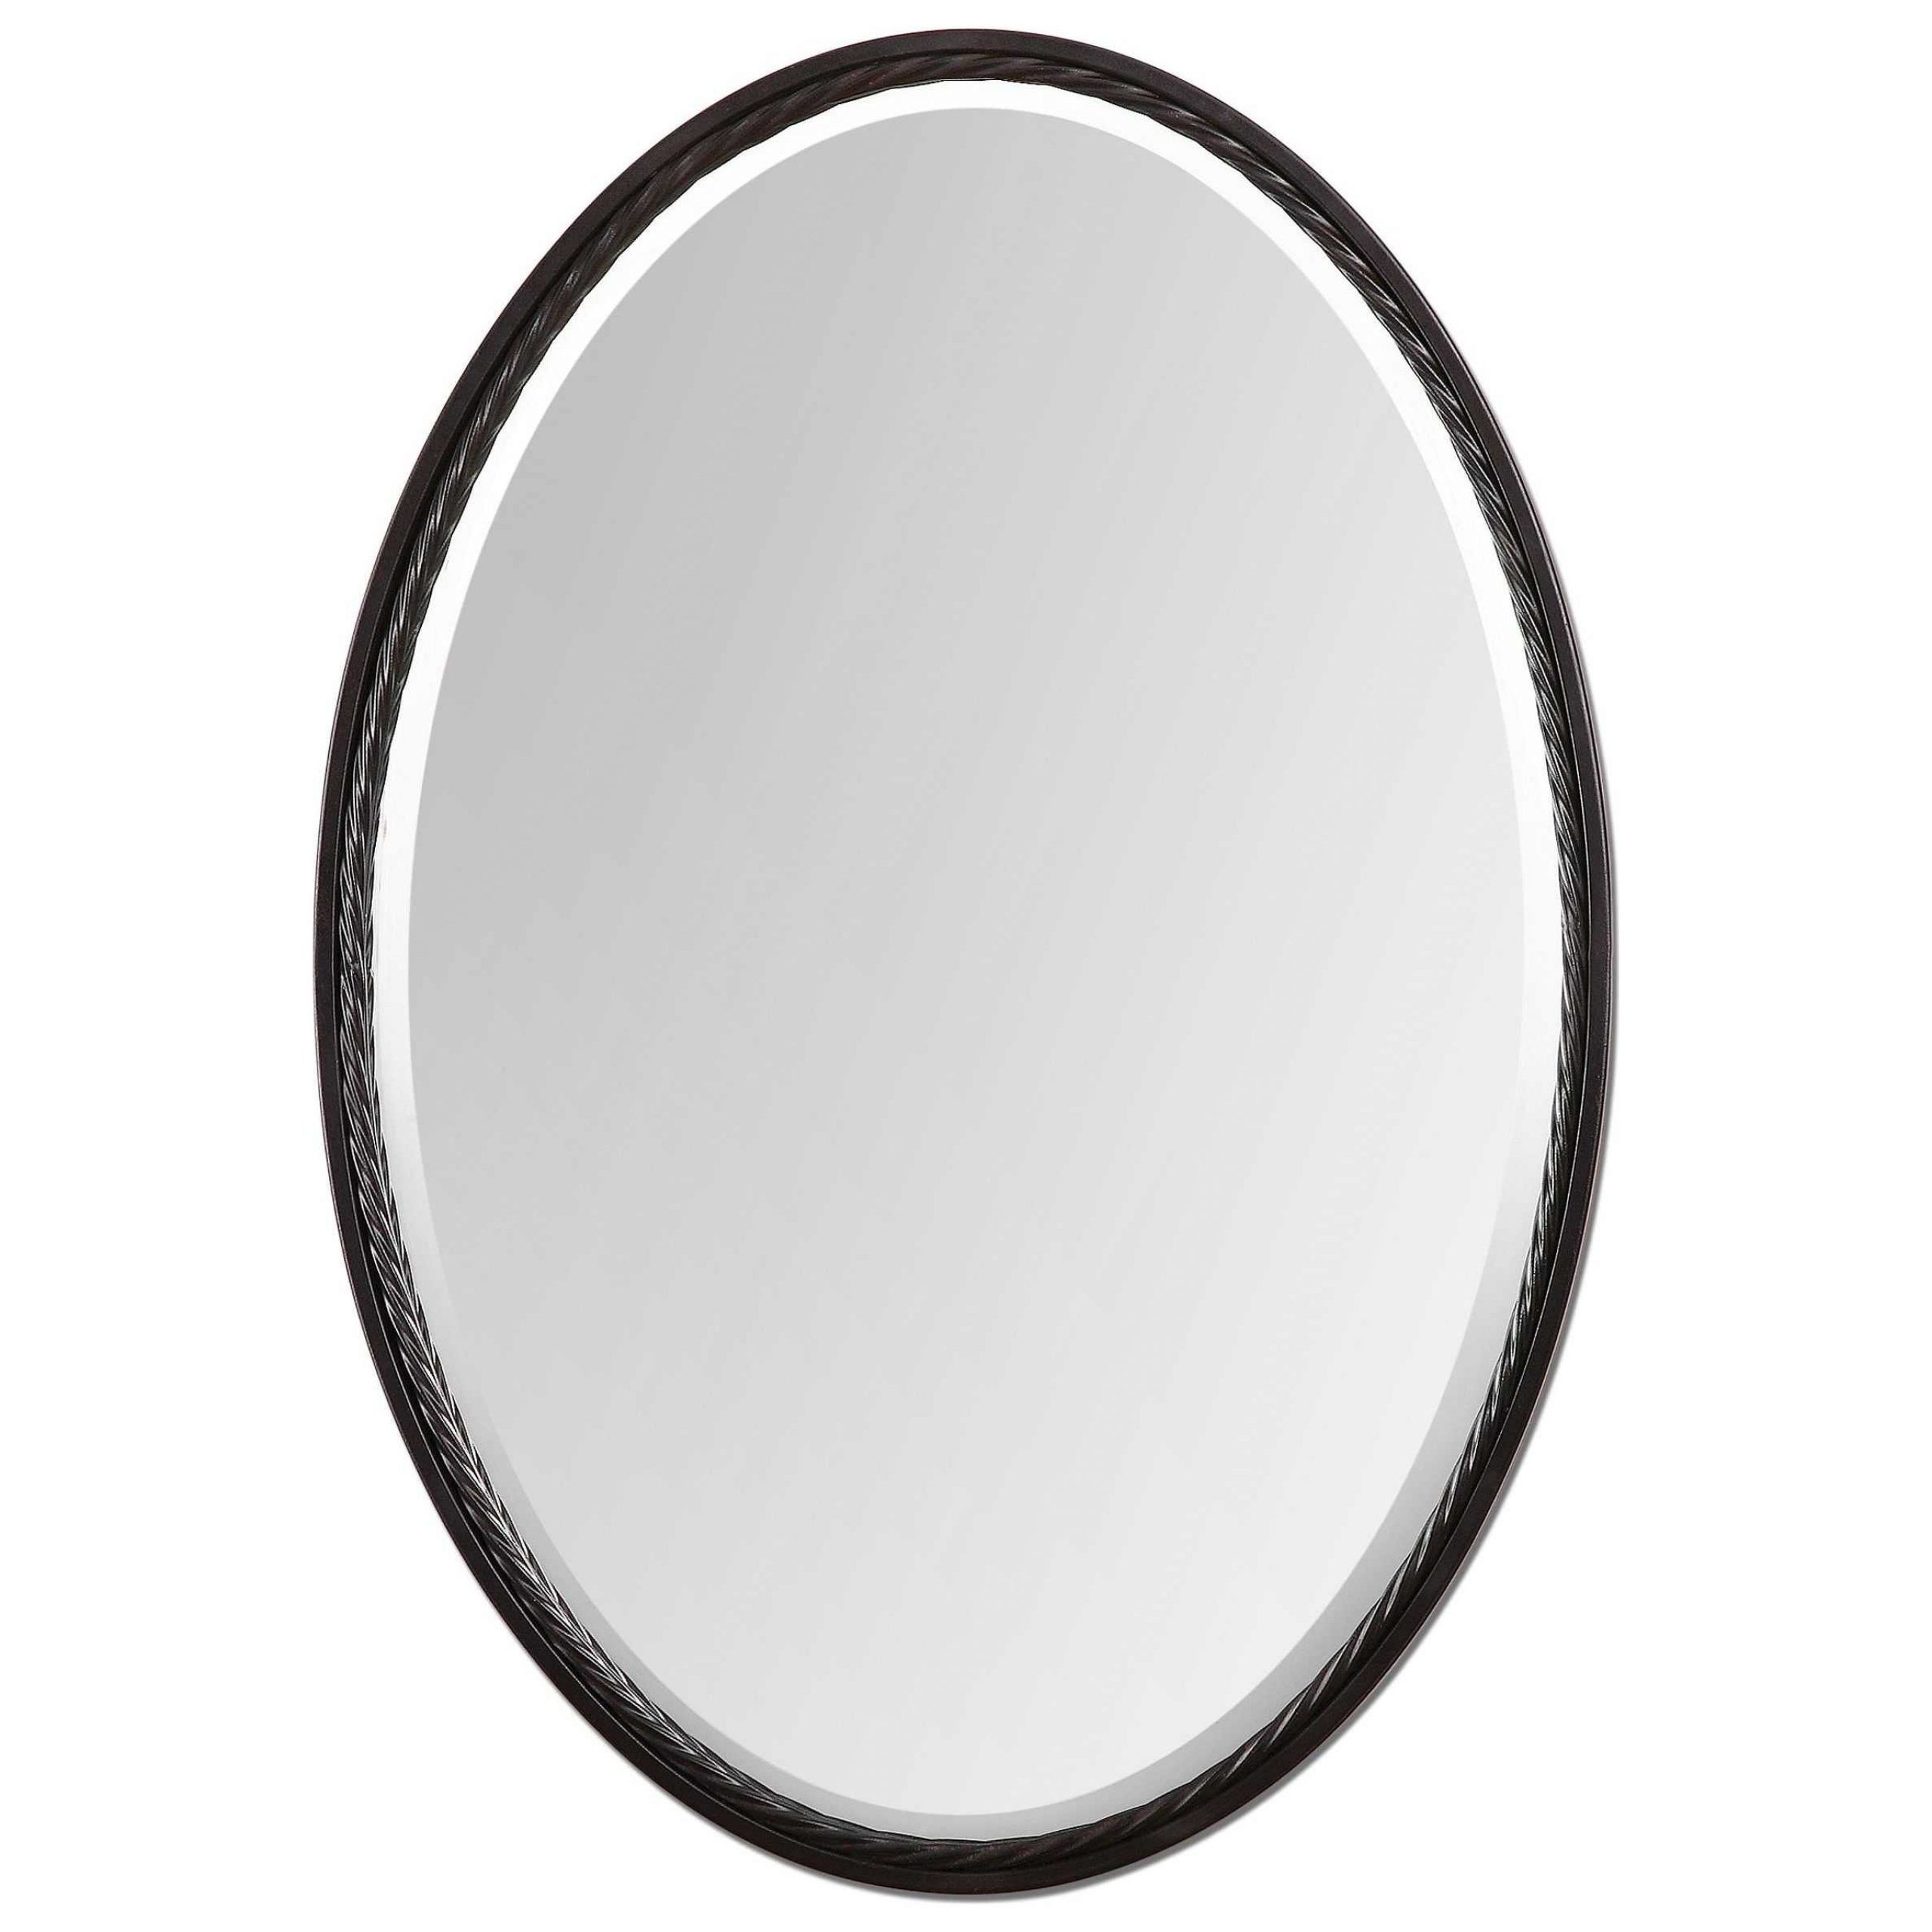 Uttermost Casalina 22 X 32 Oil Rubbed Bronze Oval Wall Mirror | Ut01116 Throughout Ceiling Hung Oiled Bronze Oval Mirrors (View 2 of 15)